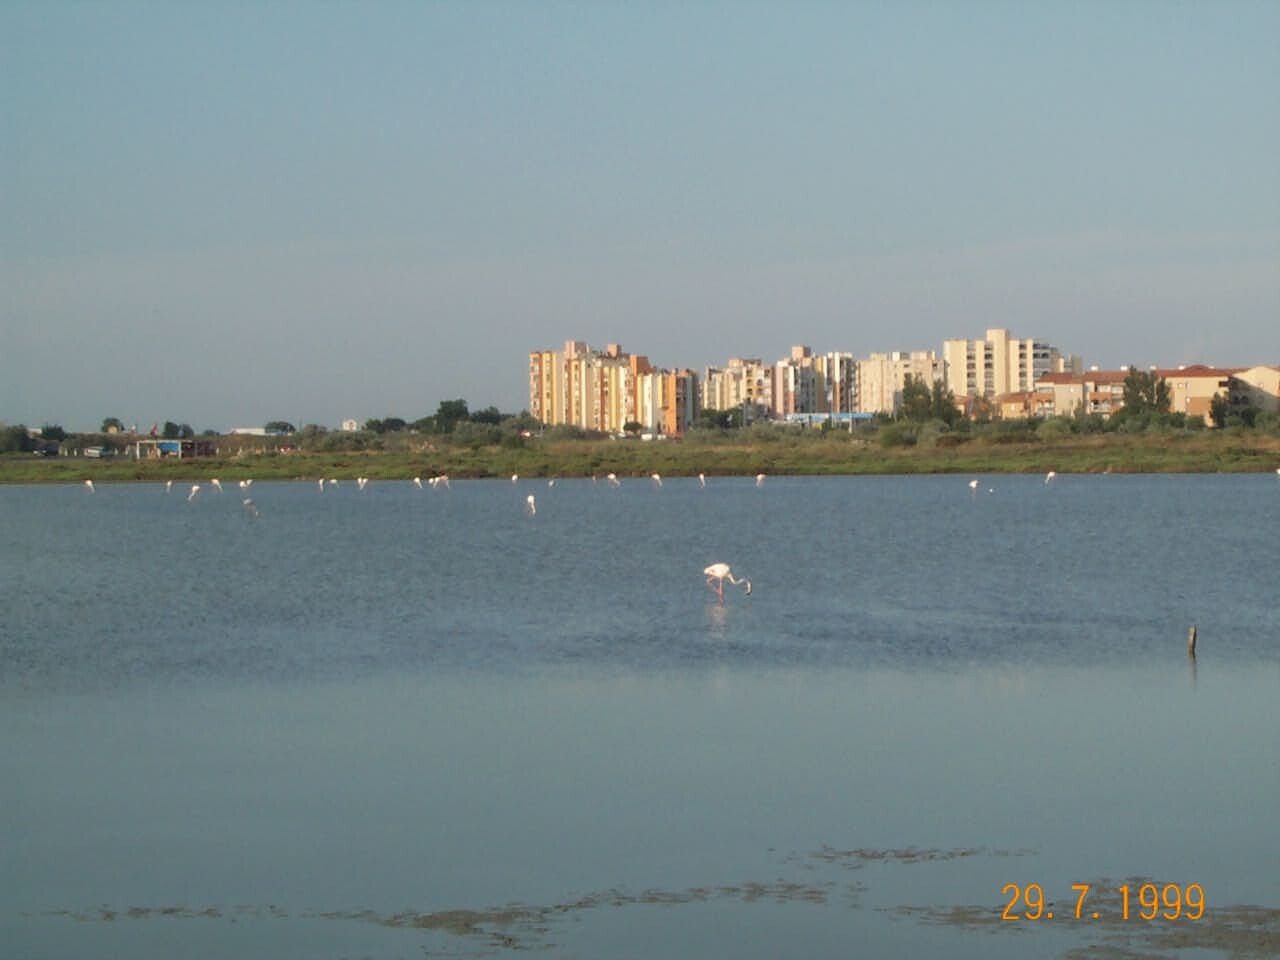 View over the lake with the flamingo